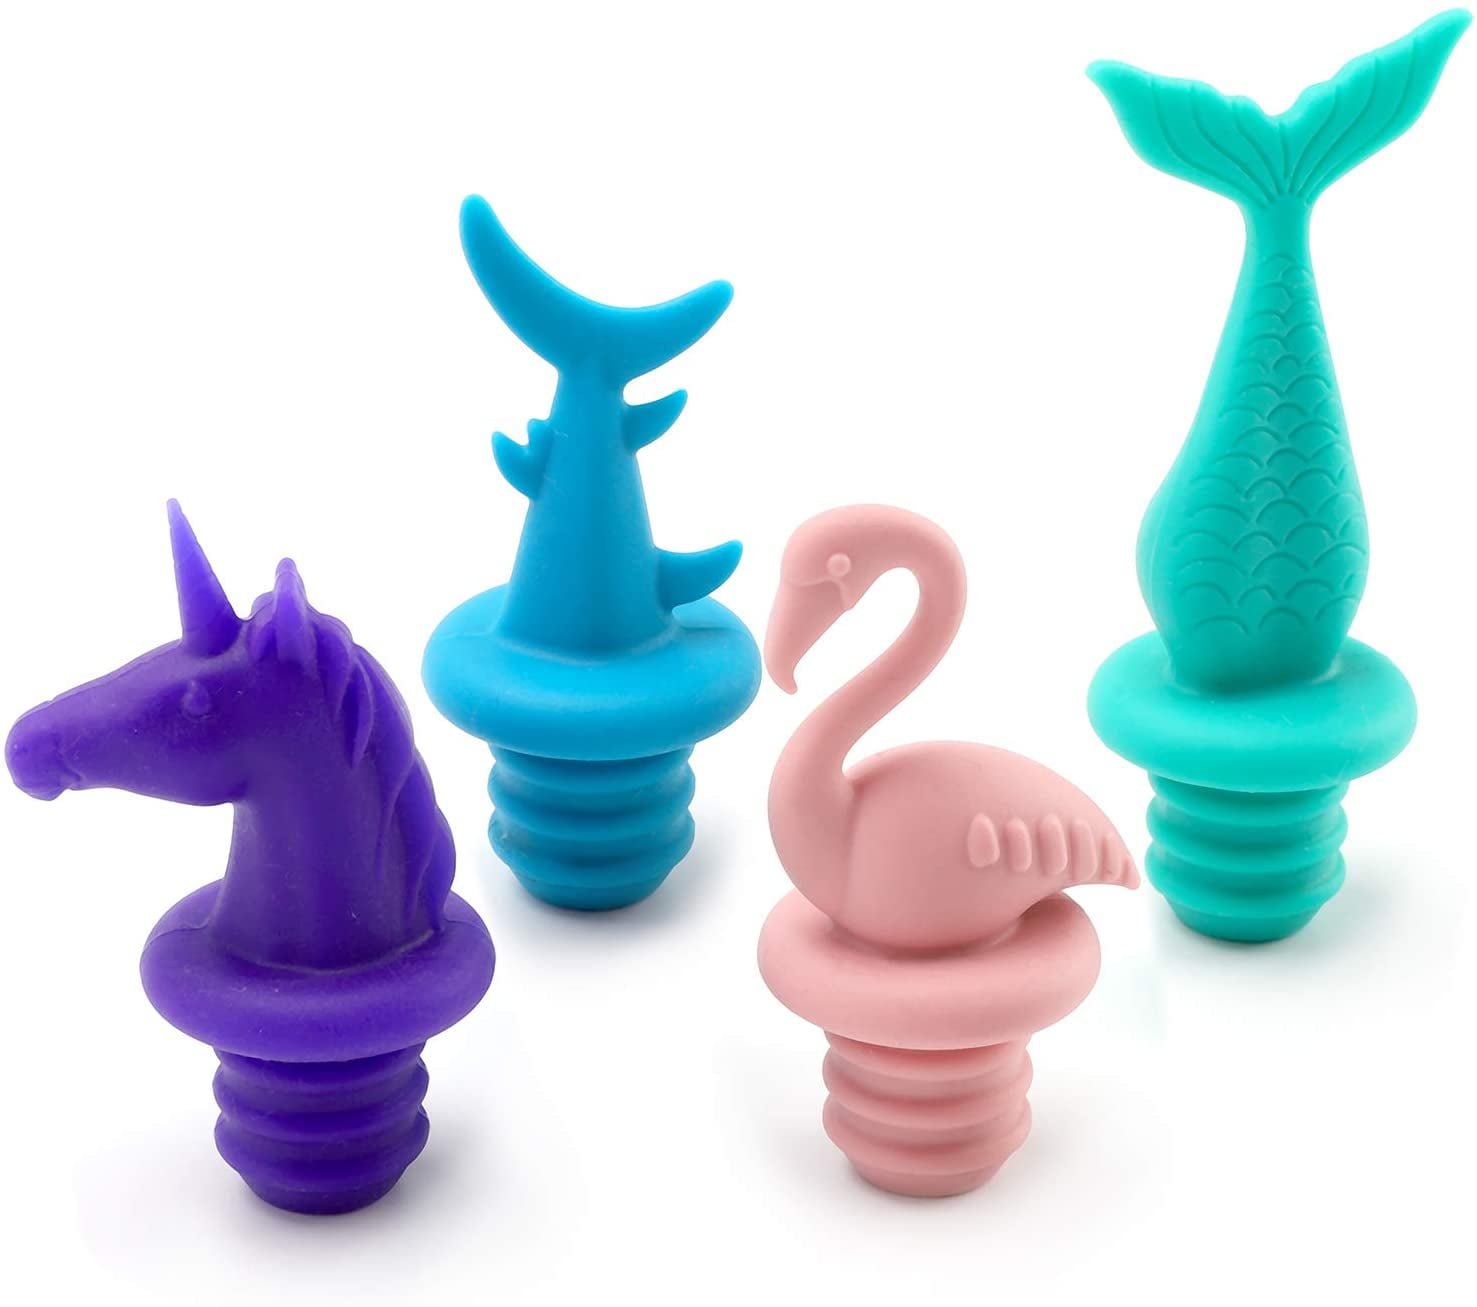 Unicorn and Mermaid Champagne Stopper Beer Stopper Silicone Wine Stoppers Set of 4,Cute Animal Bottle Stopper Reusable Bottle Plugs with Screw for Preserving Wine Champagne Beverage,Shark,Flamingo 